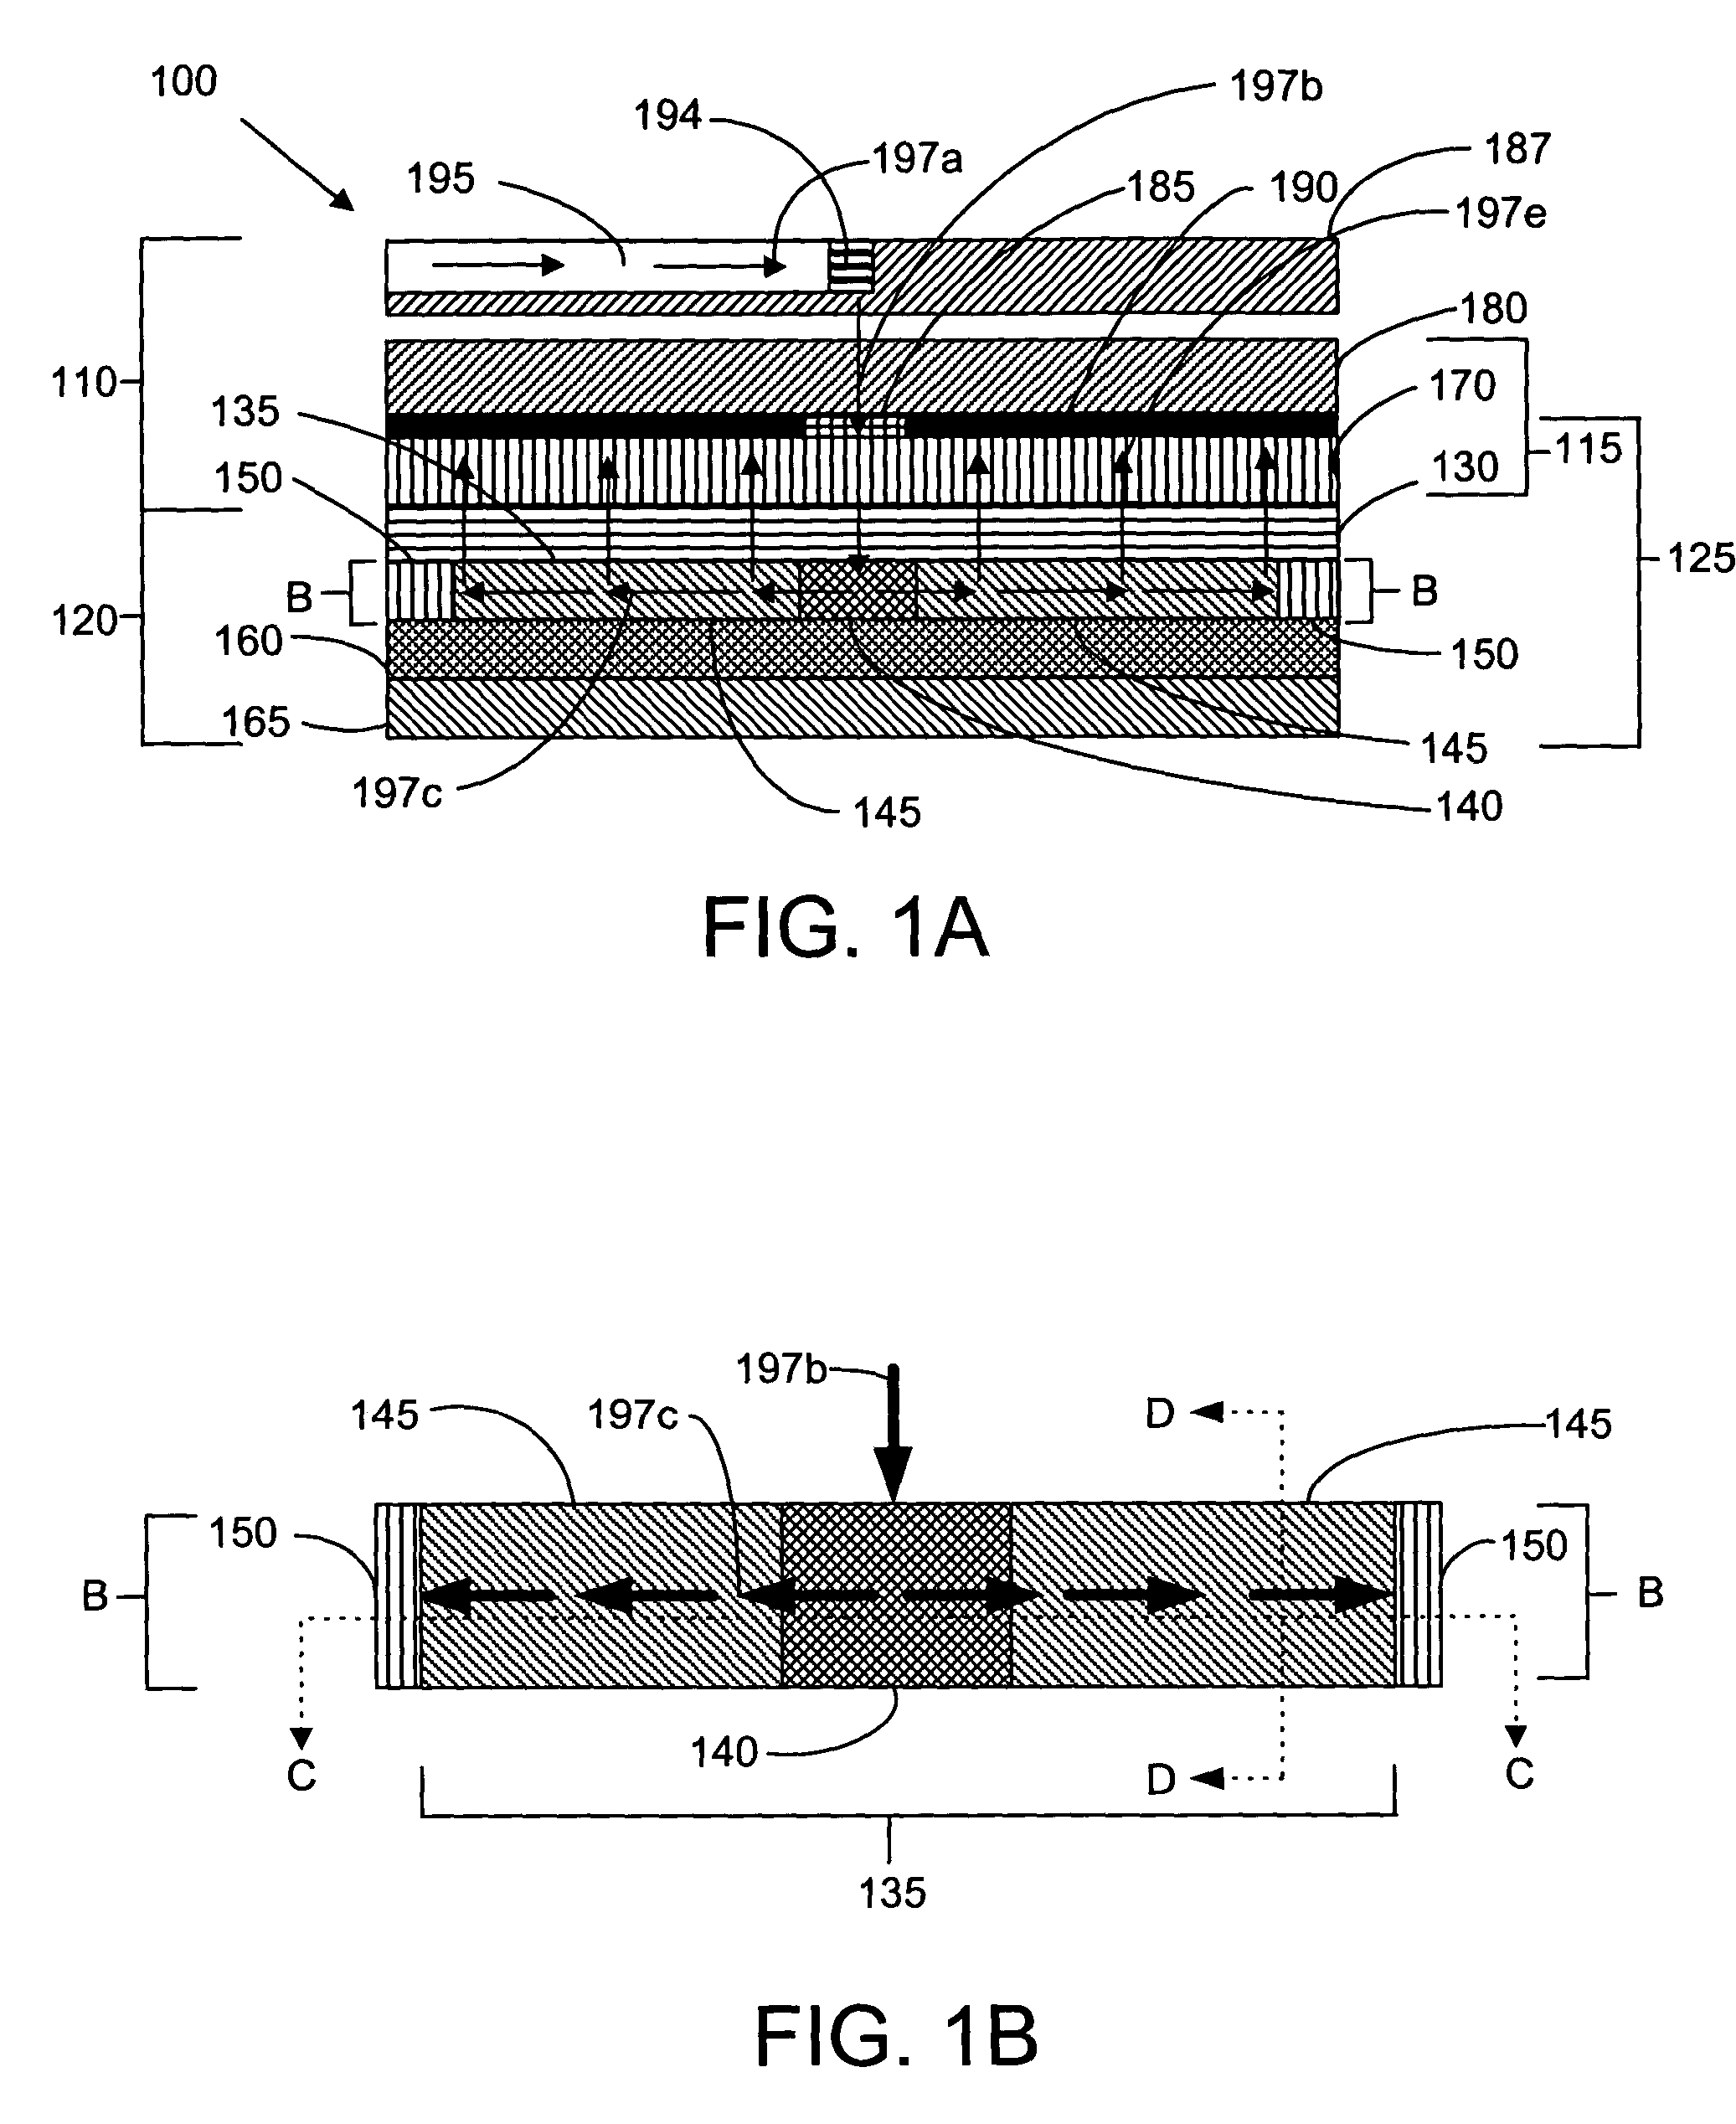 Back-side-of-die, through-wafer guided-wave optical clock distribution networks, method of fabrication thereof, and uses thereof